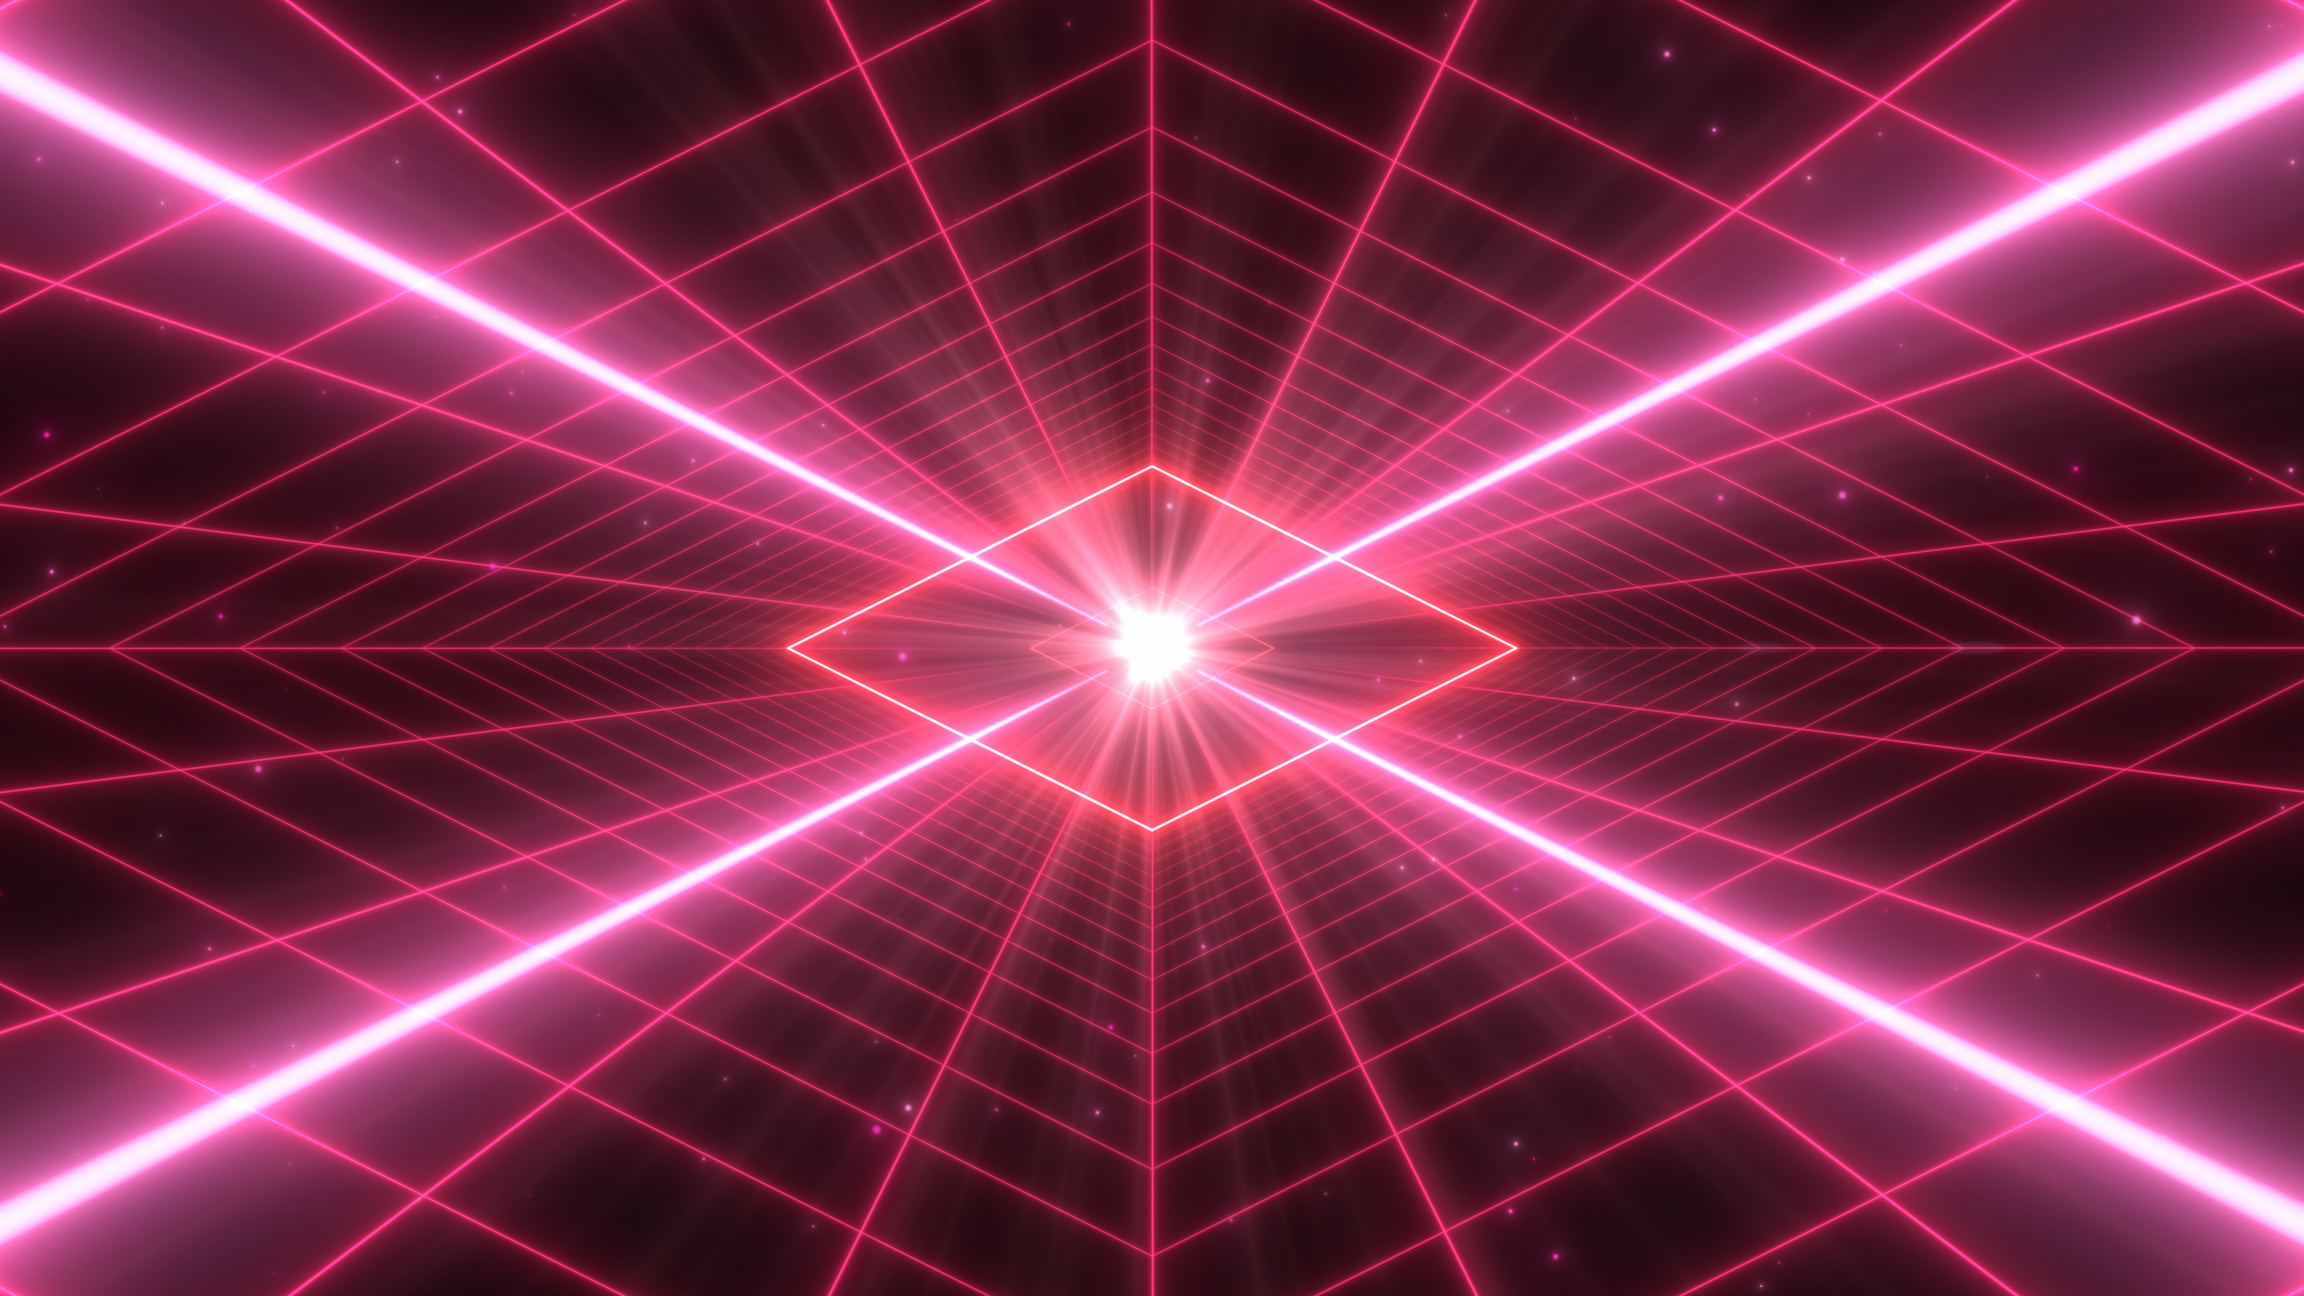 Synthwave Retro Grid Tunnel and Futuristic Diamond Neon Lights Glow - Abstract Background Texture